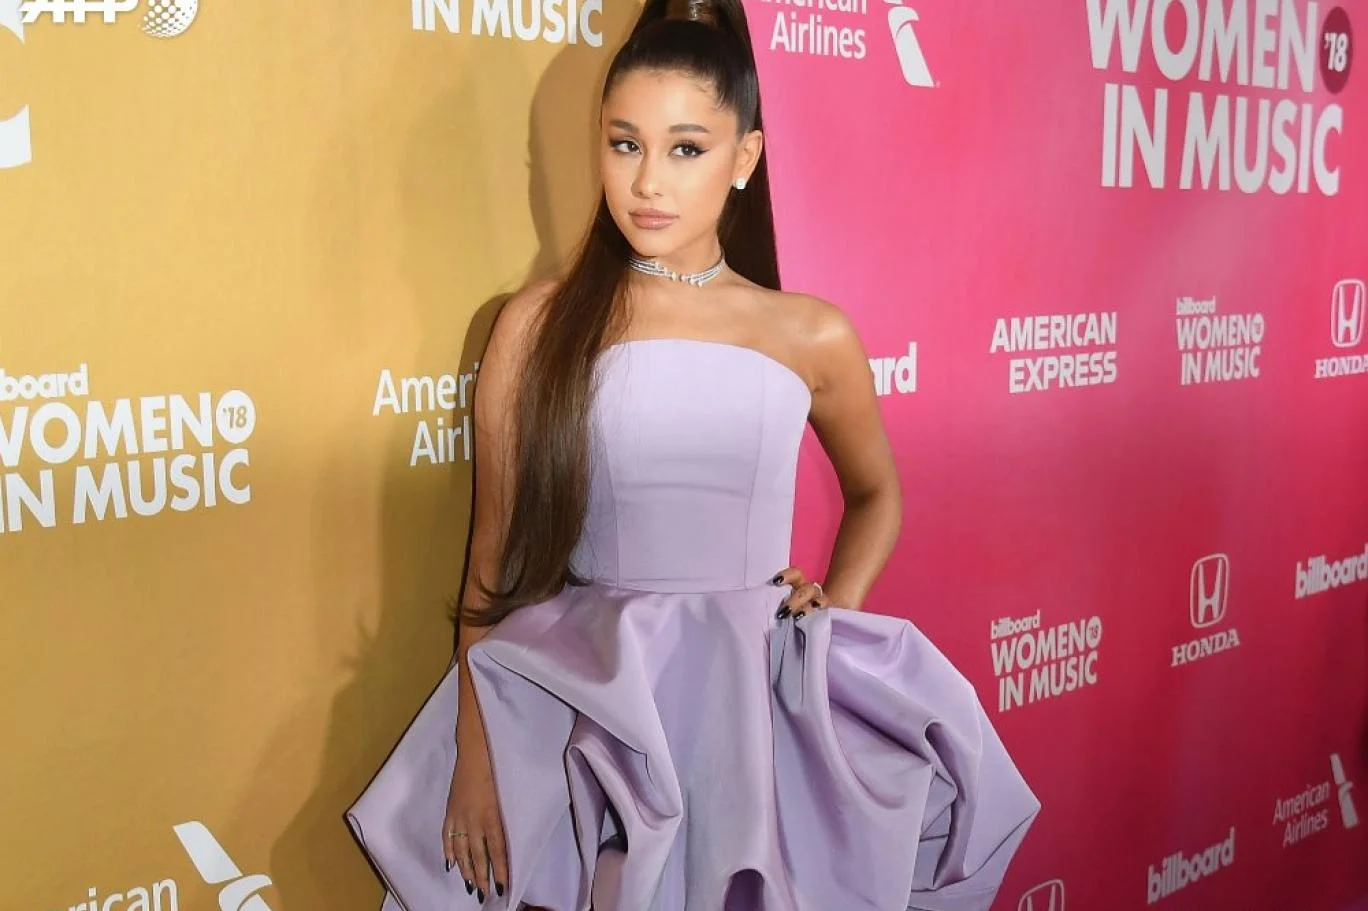 Ariana Grande Isn't Making a New Album Until She's Done With 'Wicked